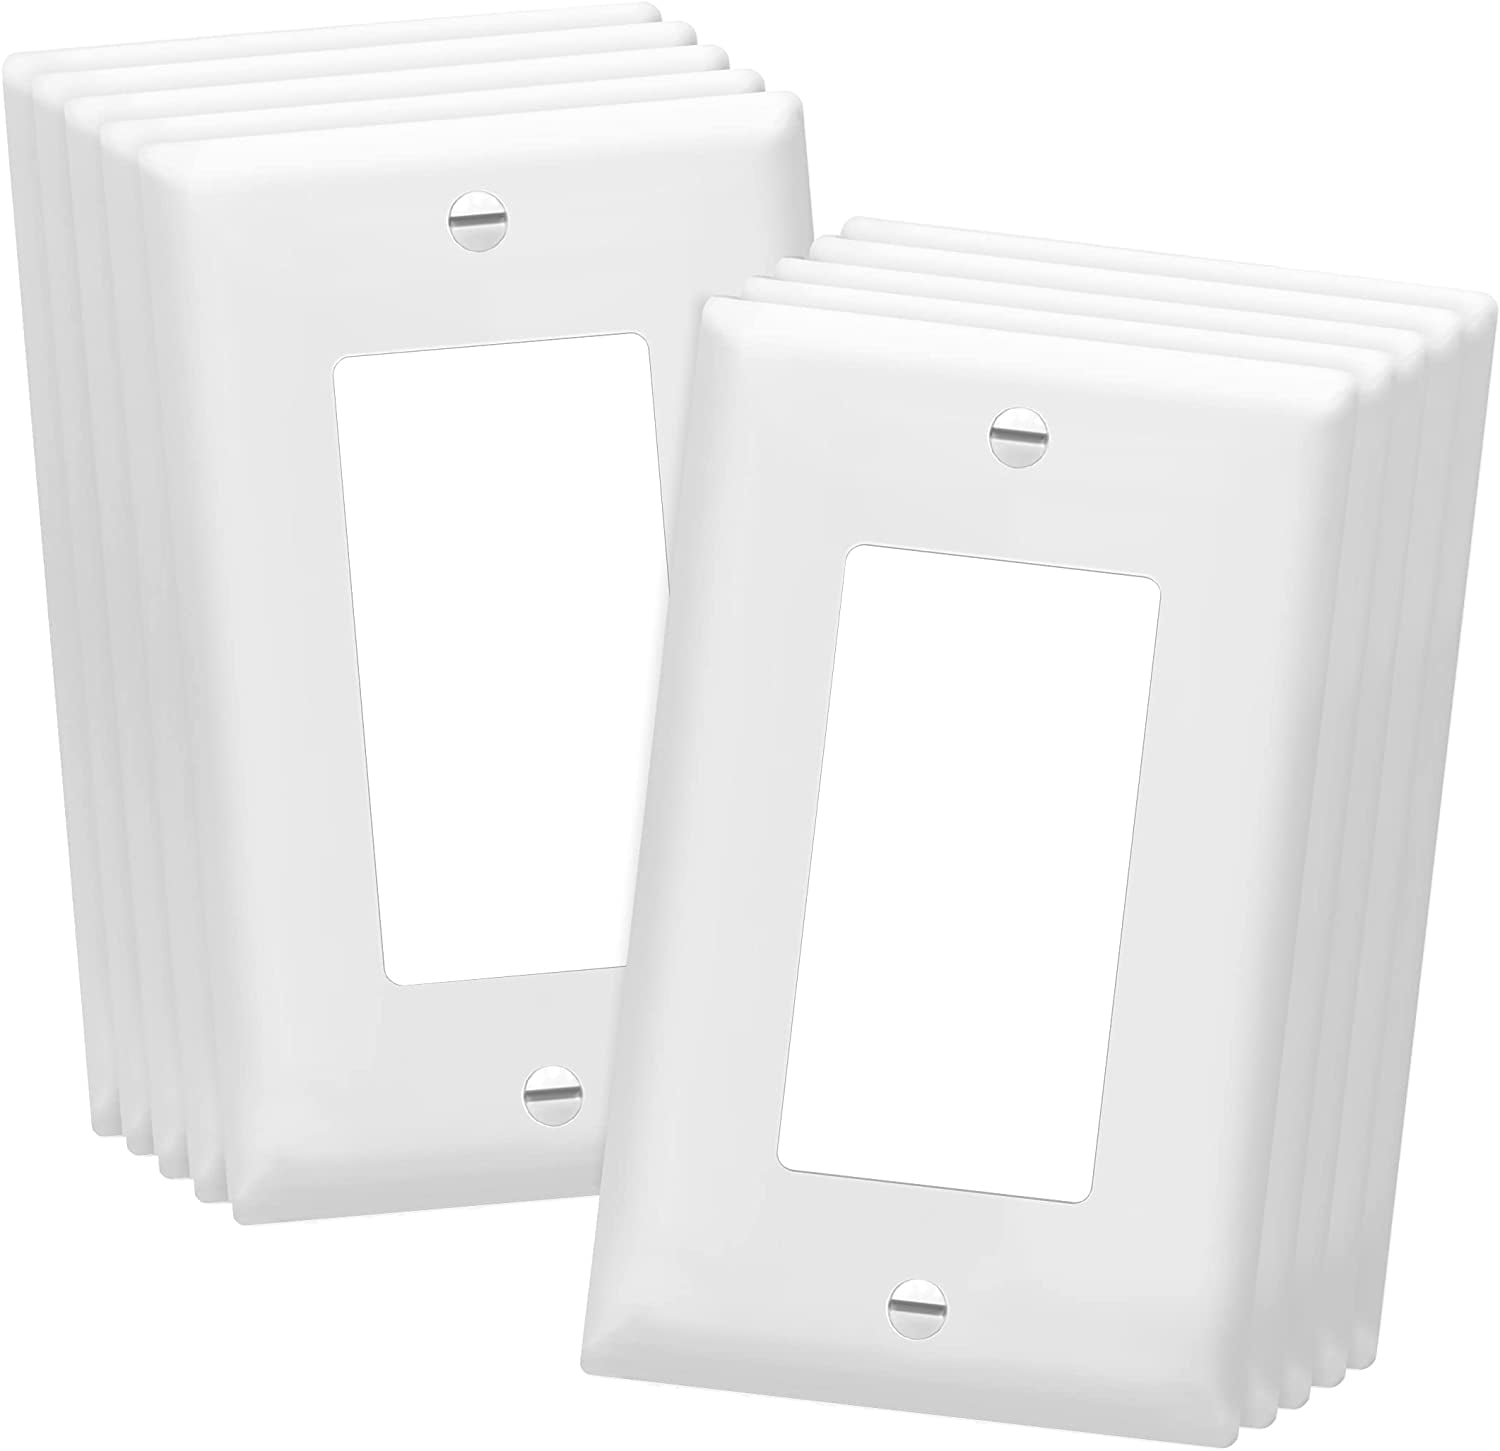 Residential and Commercial 1-Gang Screwless Decorator Wall Plate Cover,Standard Size Outlet Cover for GFCI Outlet,Light Switches,Dimmer,USB Wall Outlet,Electrical Receptacle UL Listed,White（10 Pack）